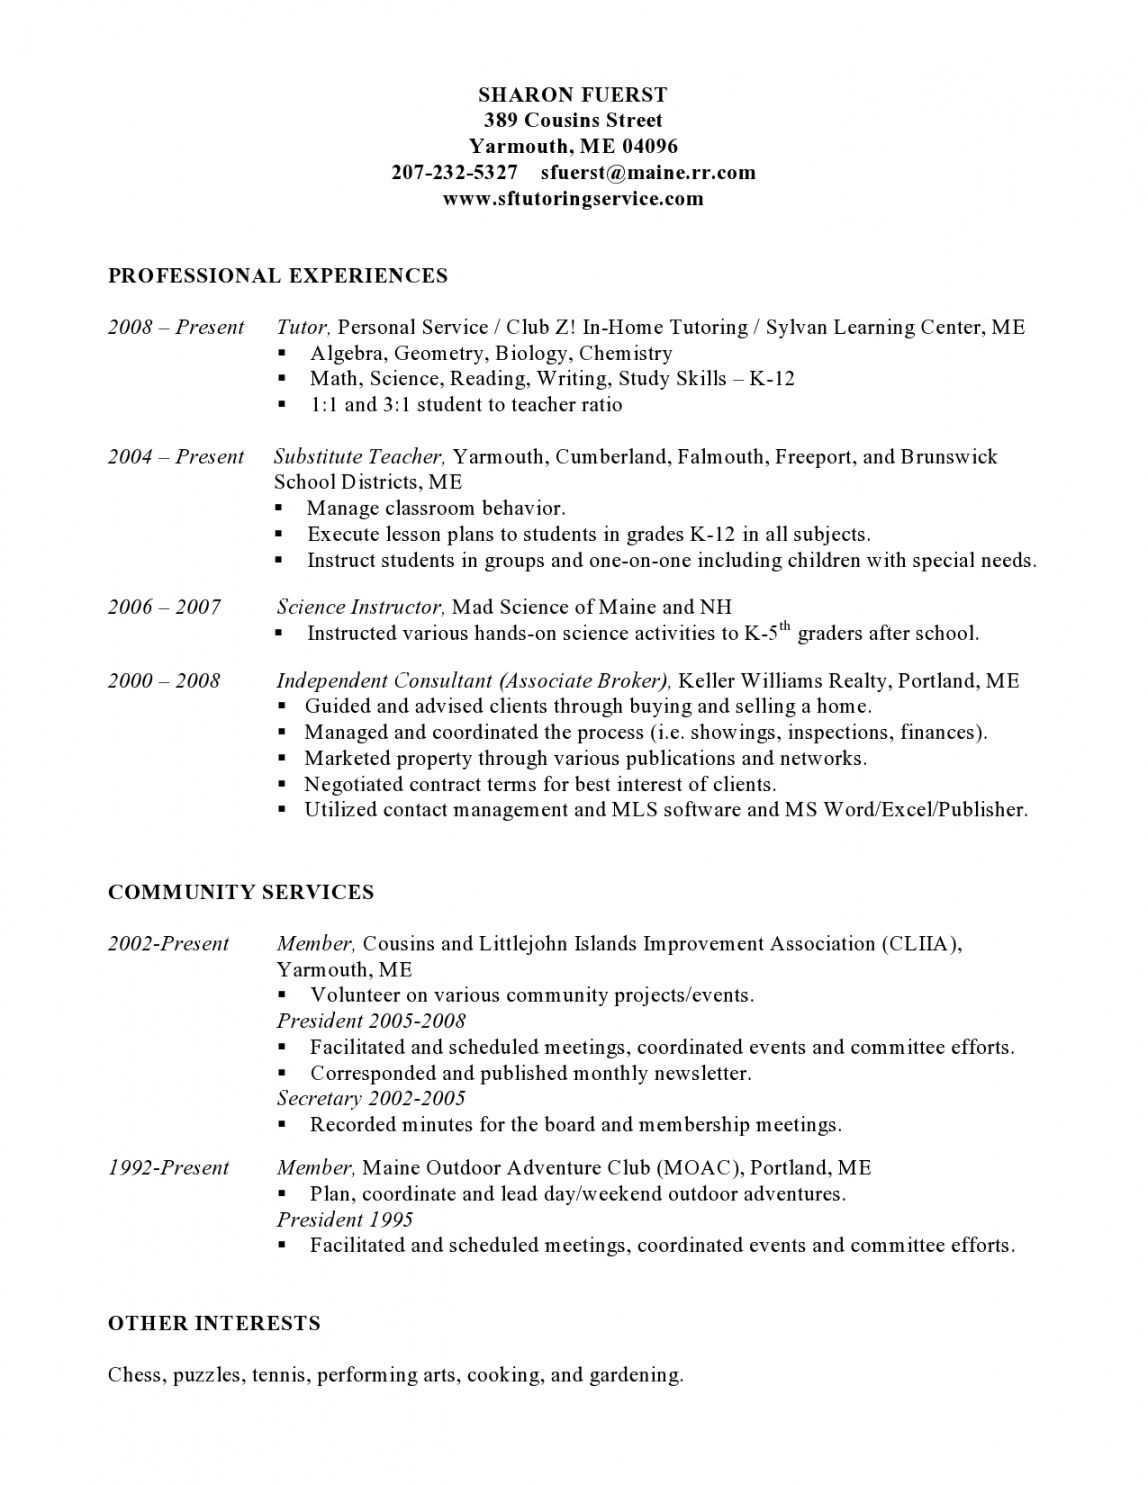 sample about sharon fuerst tutoring proposal template word